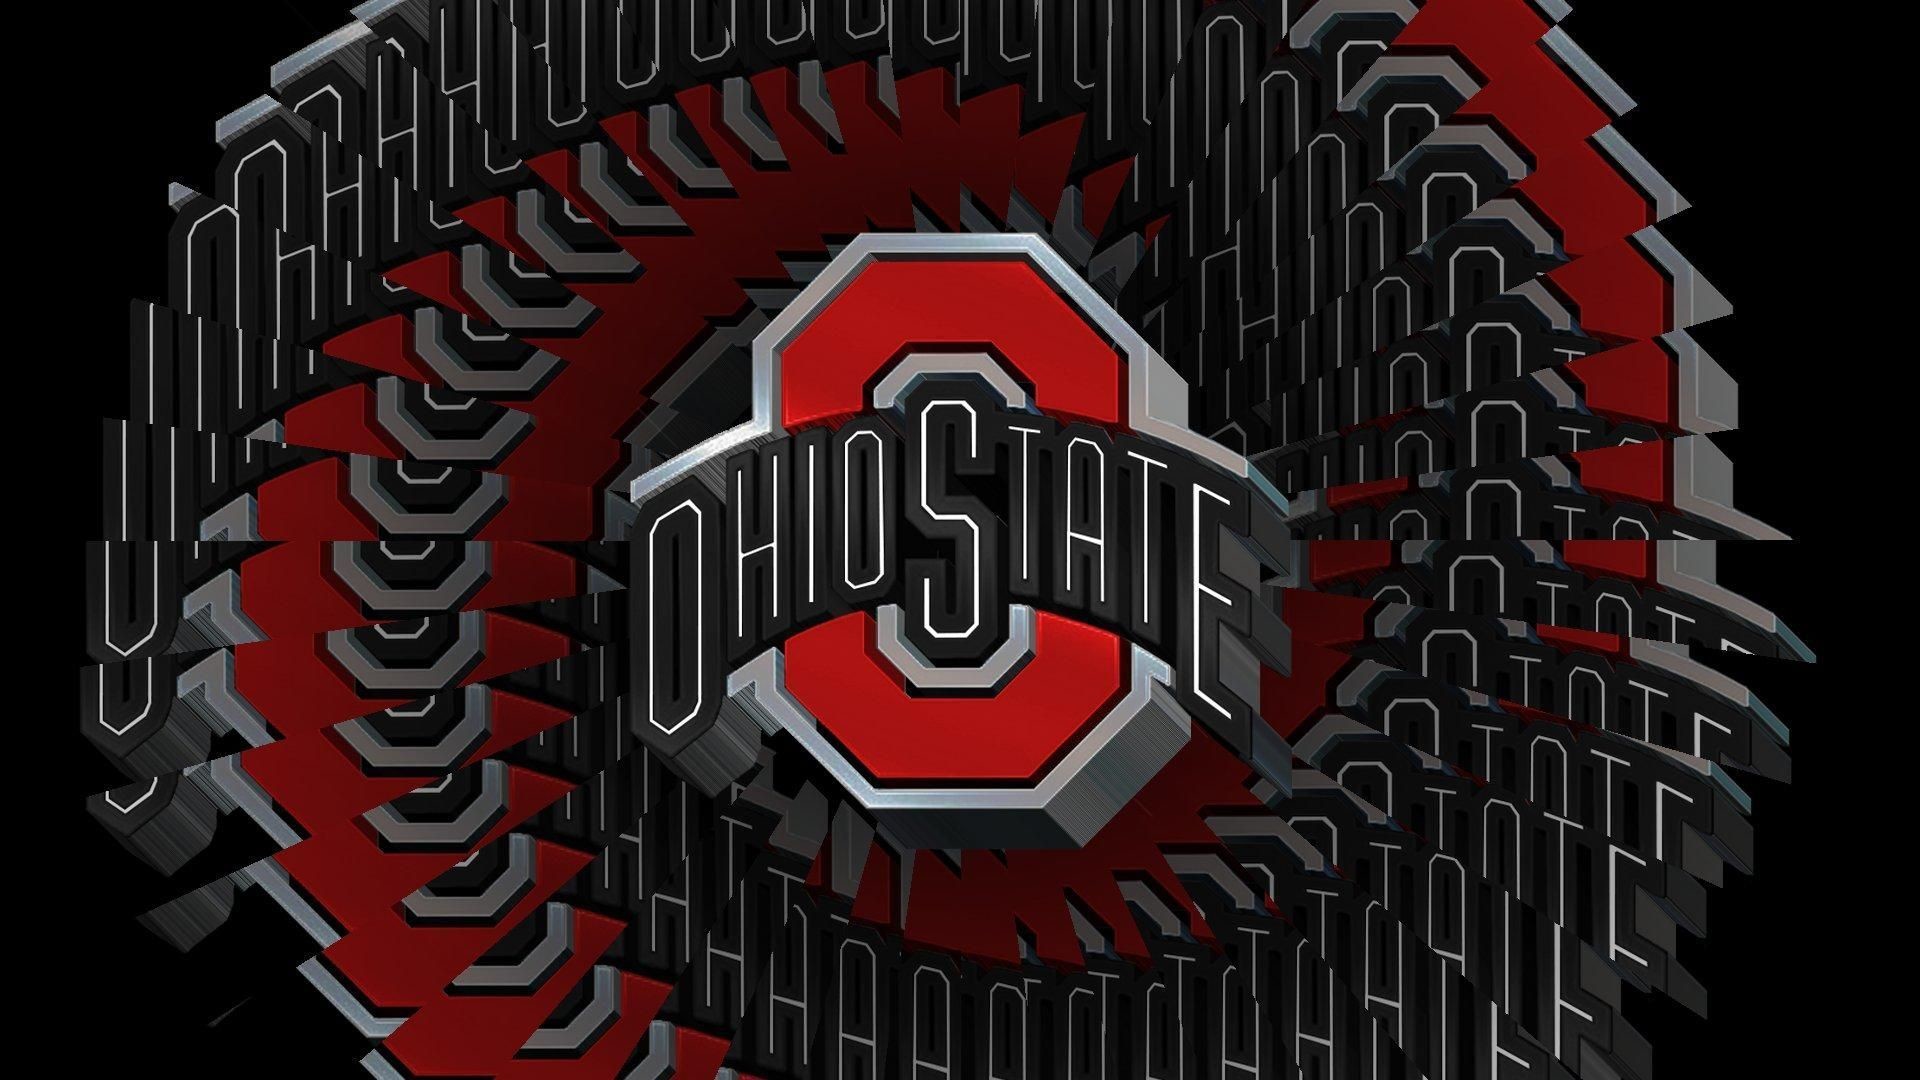 1920x1080 Wallpapers Of Ohio State University Wallpaper